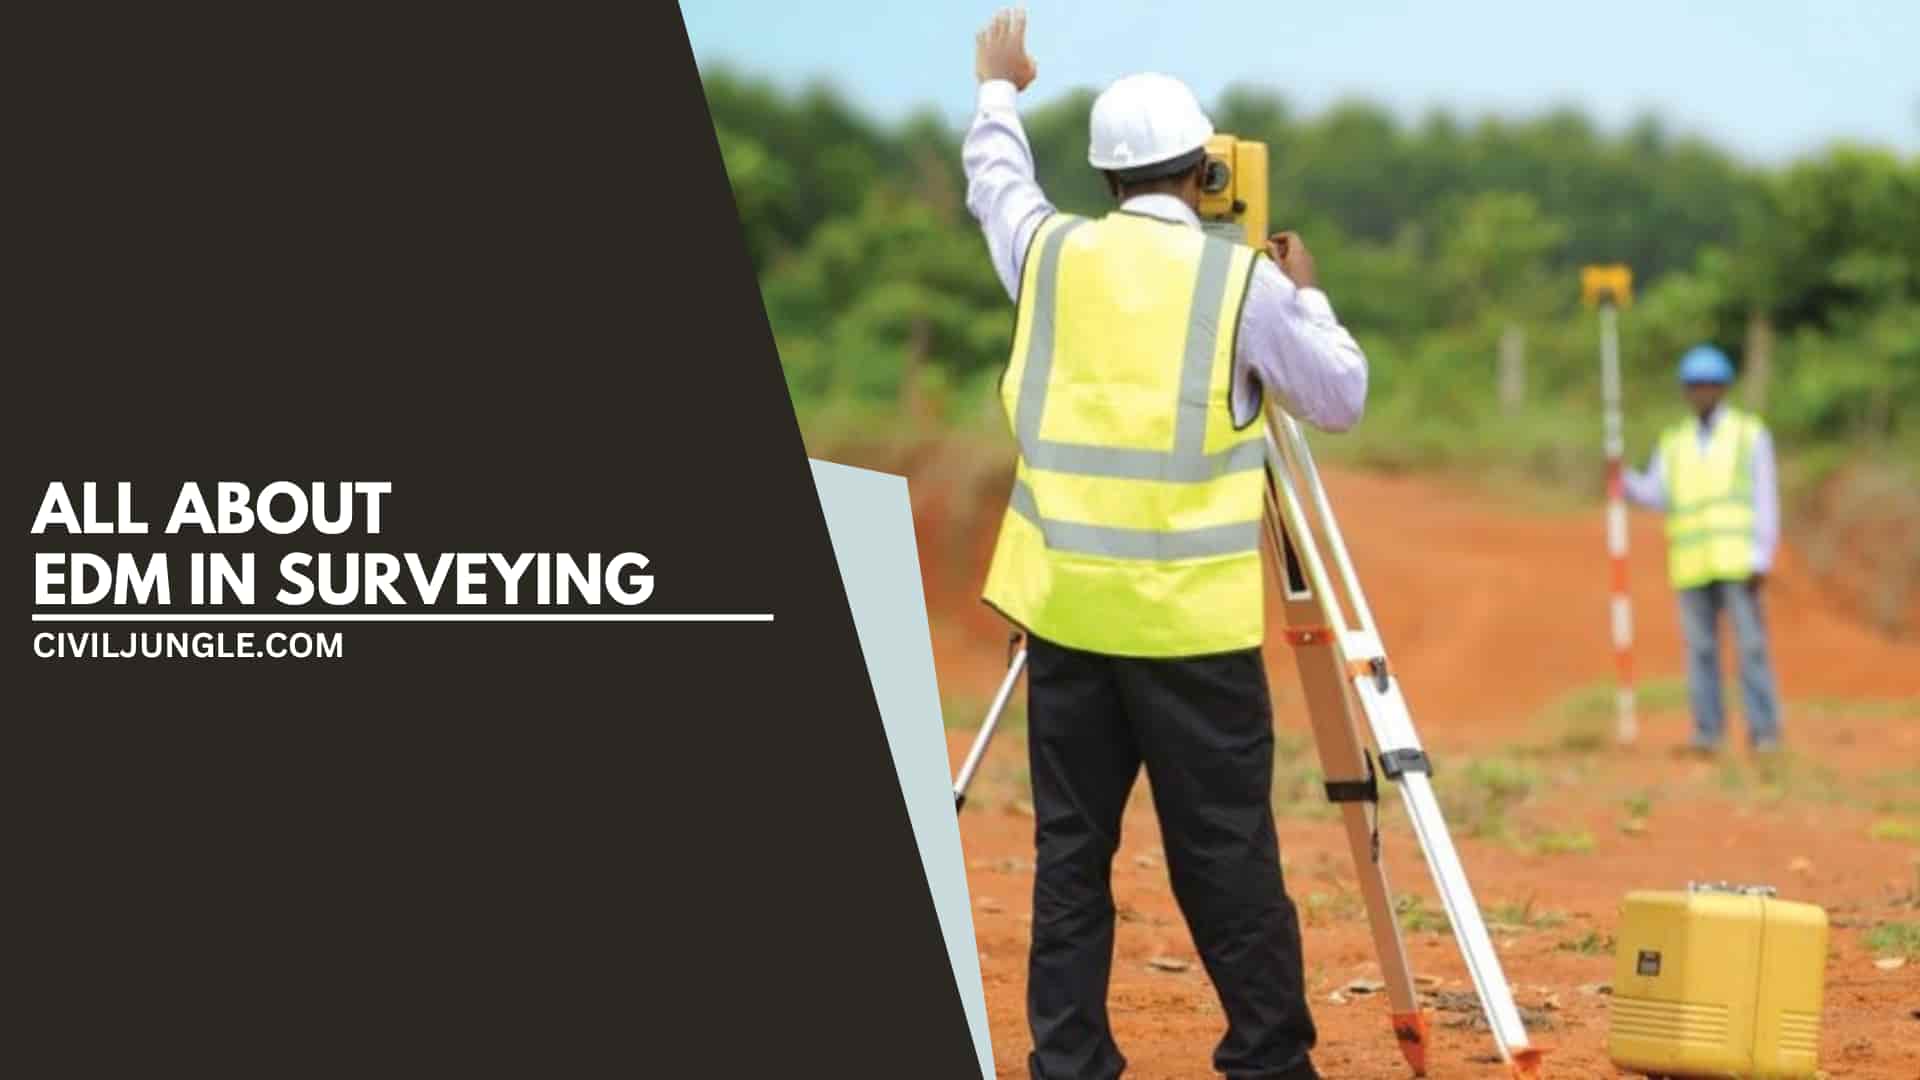 All About EDM in Surveying